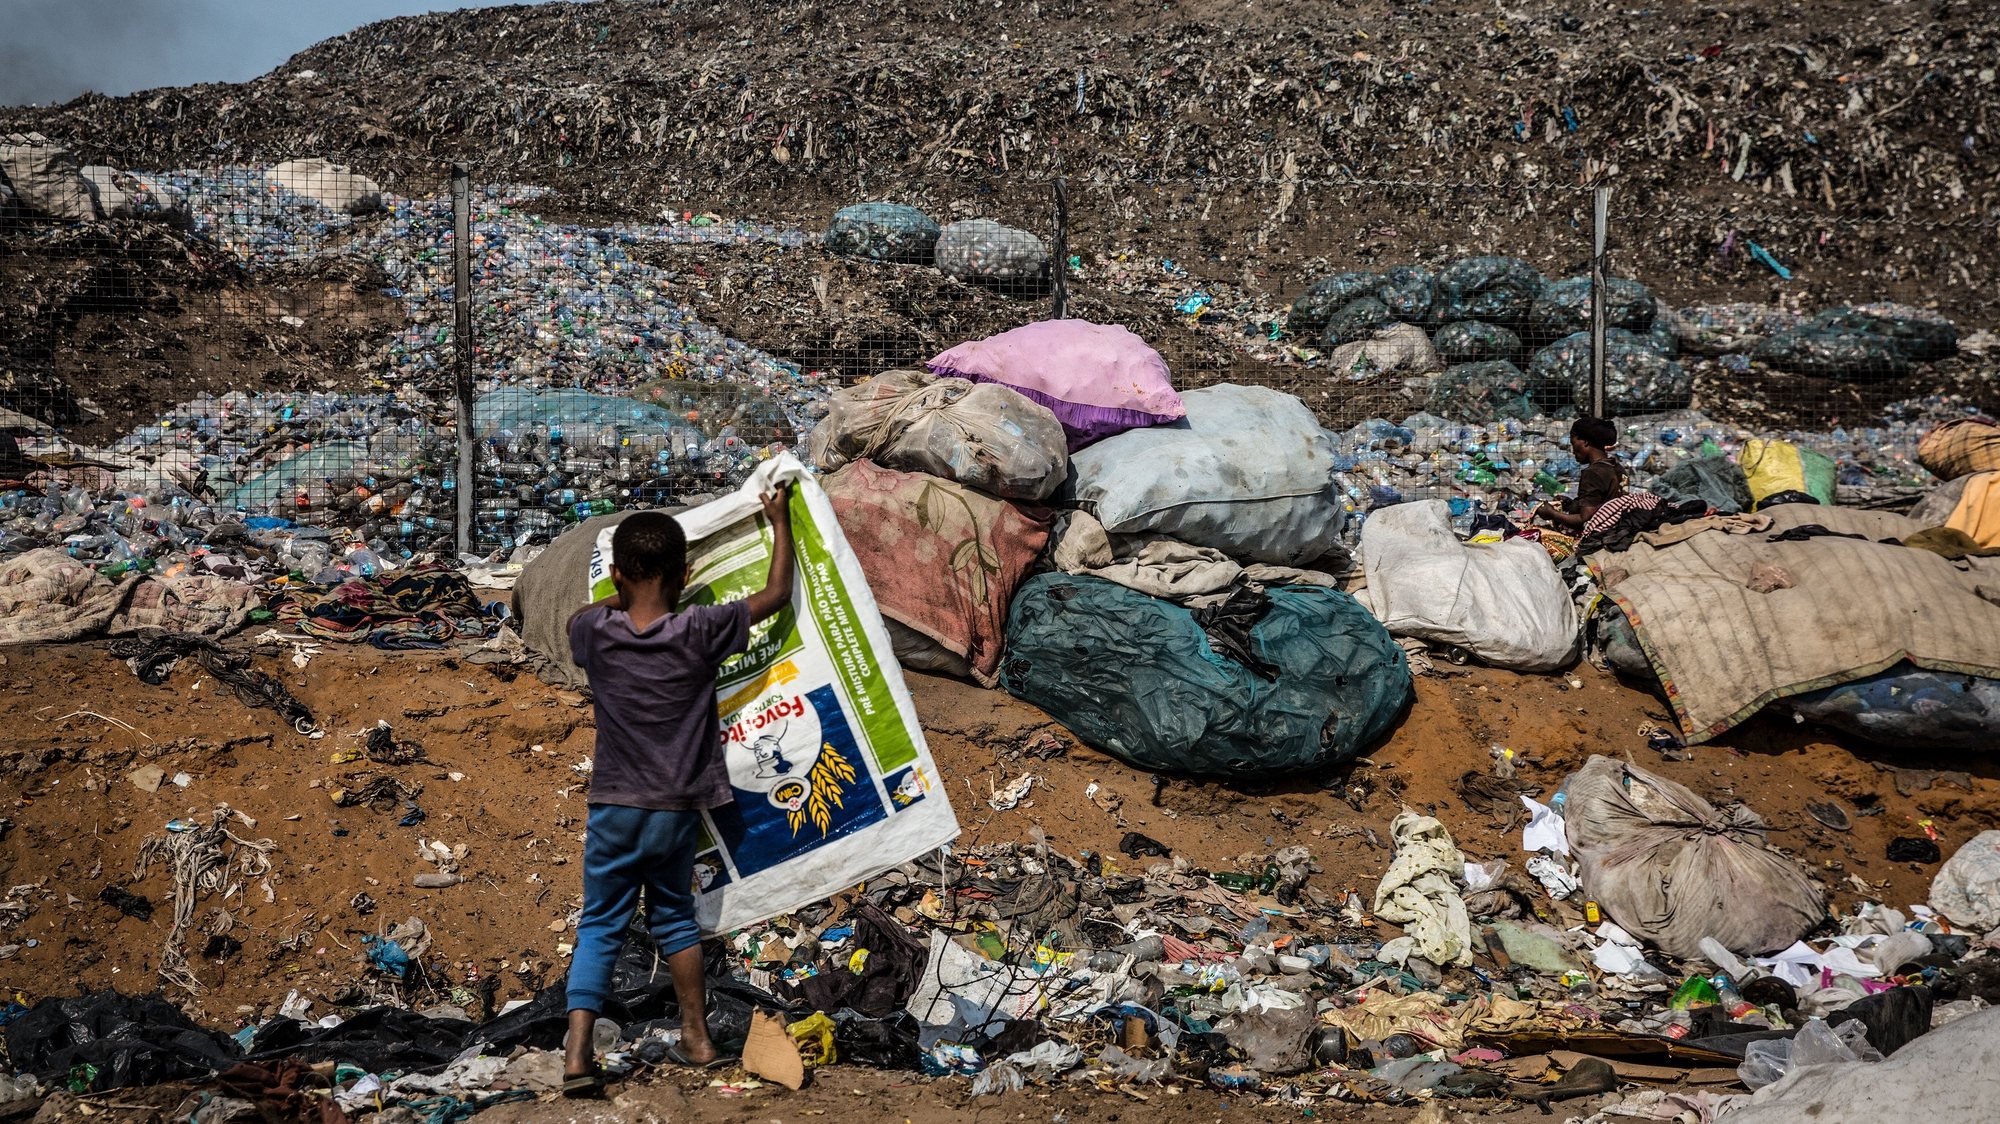 A child at the Hulene dump in Maputo, Mozambique, 20 August 2020 (issued 26 September 2020). The collection of plastic in Maputo is a business dominated mostly by young people and women and has been the income base for many families, especially those living on the outskirts of the dump. RICARDO FRANCO/LUSA